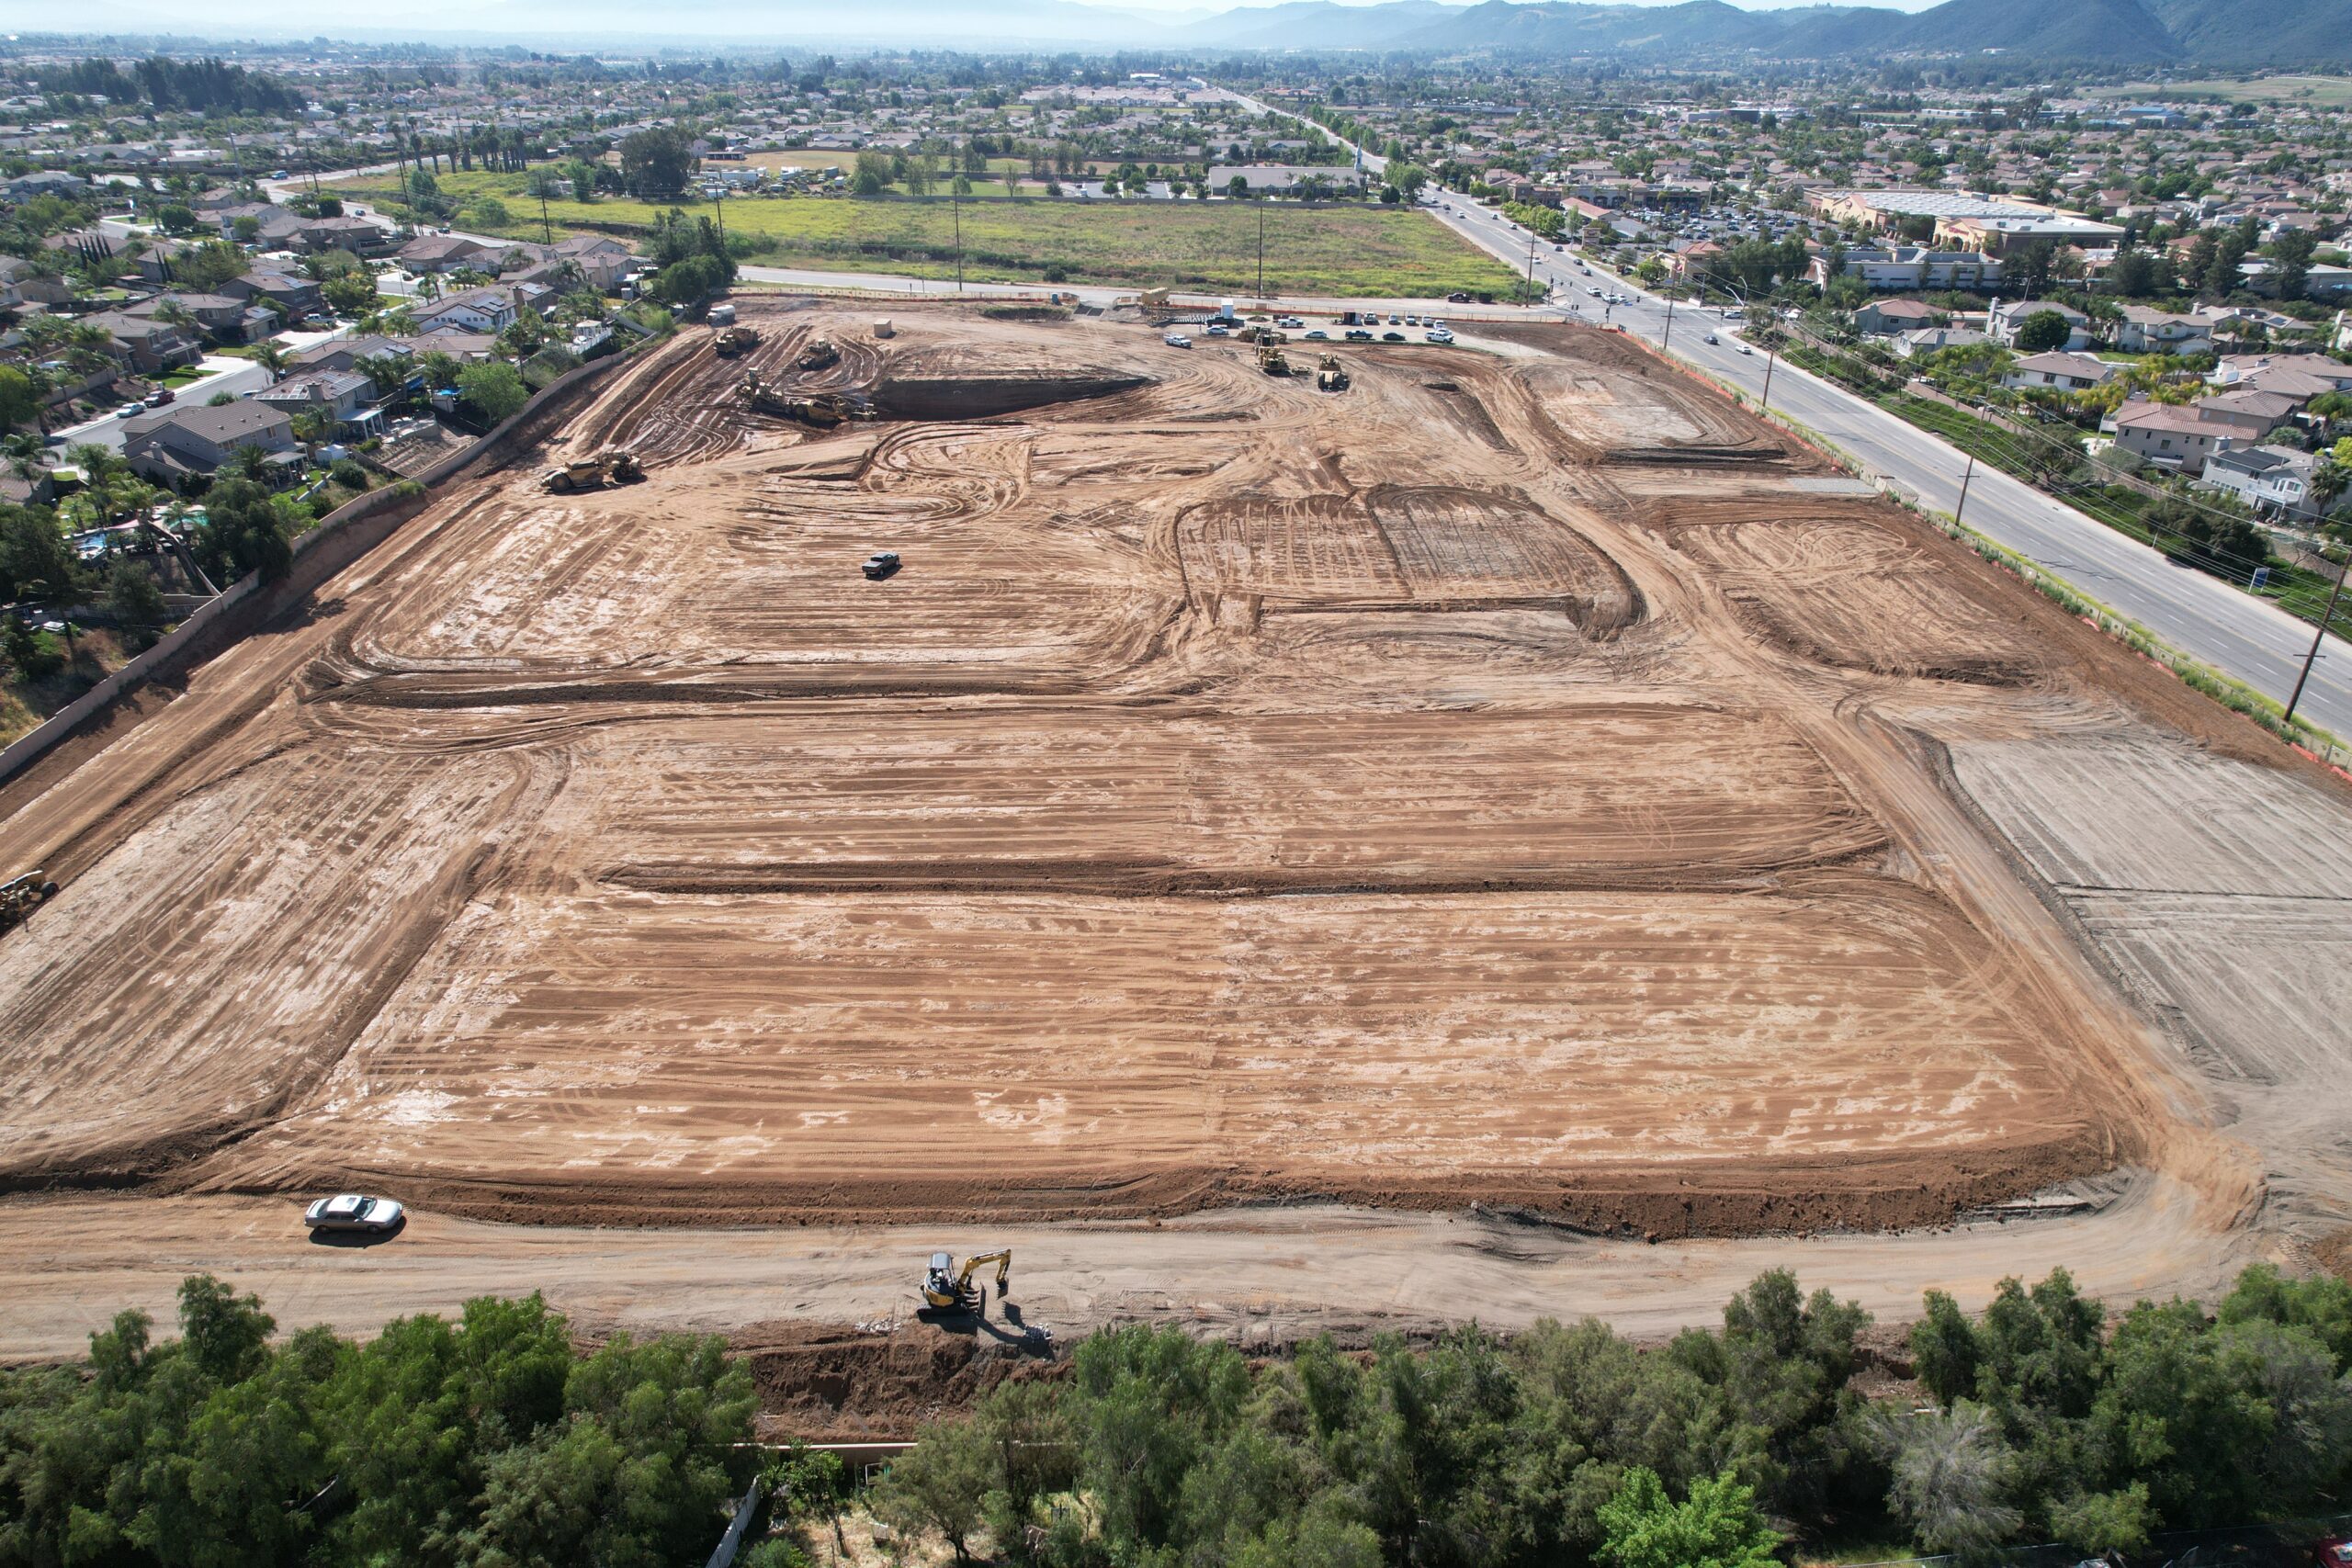 Pacific West Development Completes Grading Operations at Nutmeg Apartments – Commences Wet Utility Installation